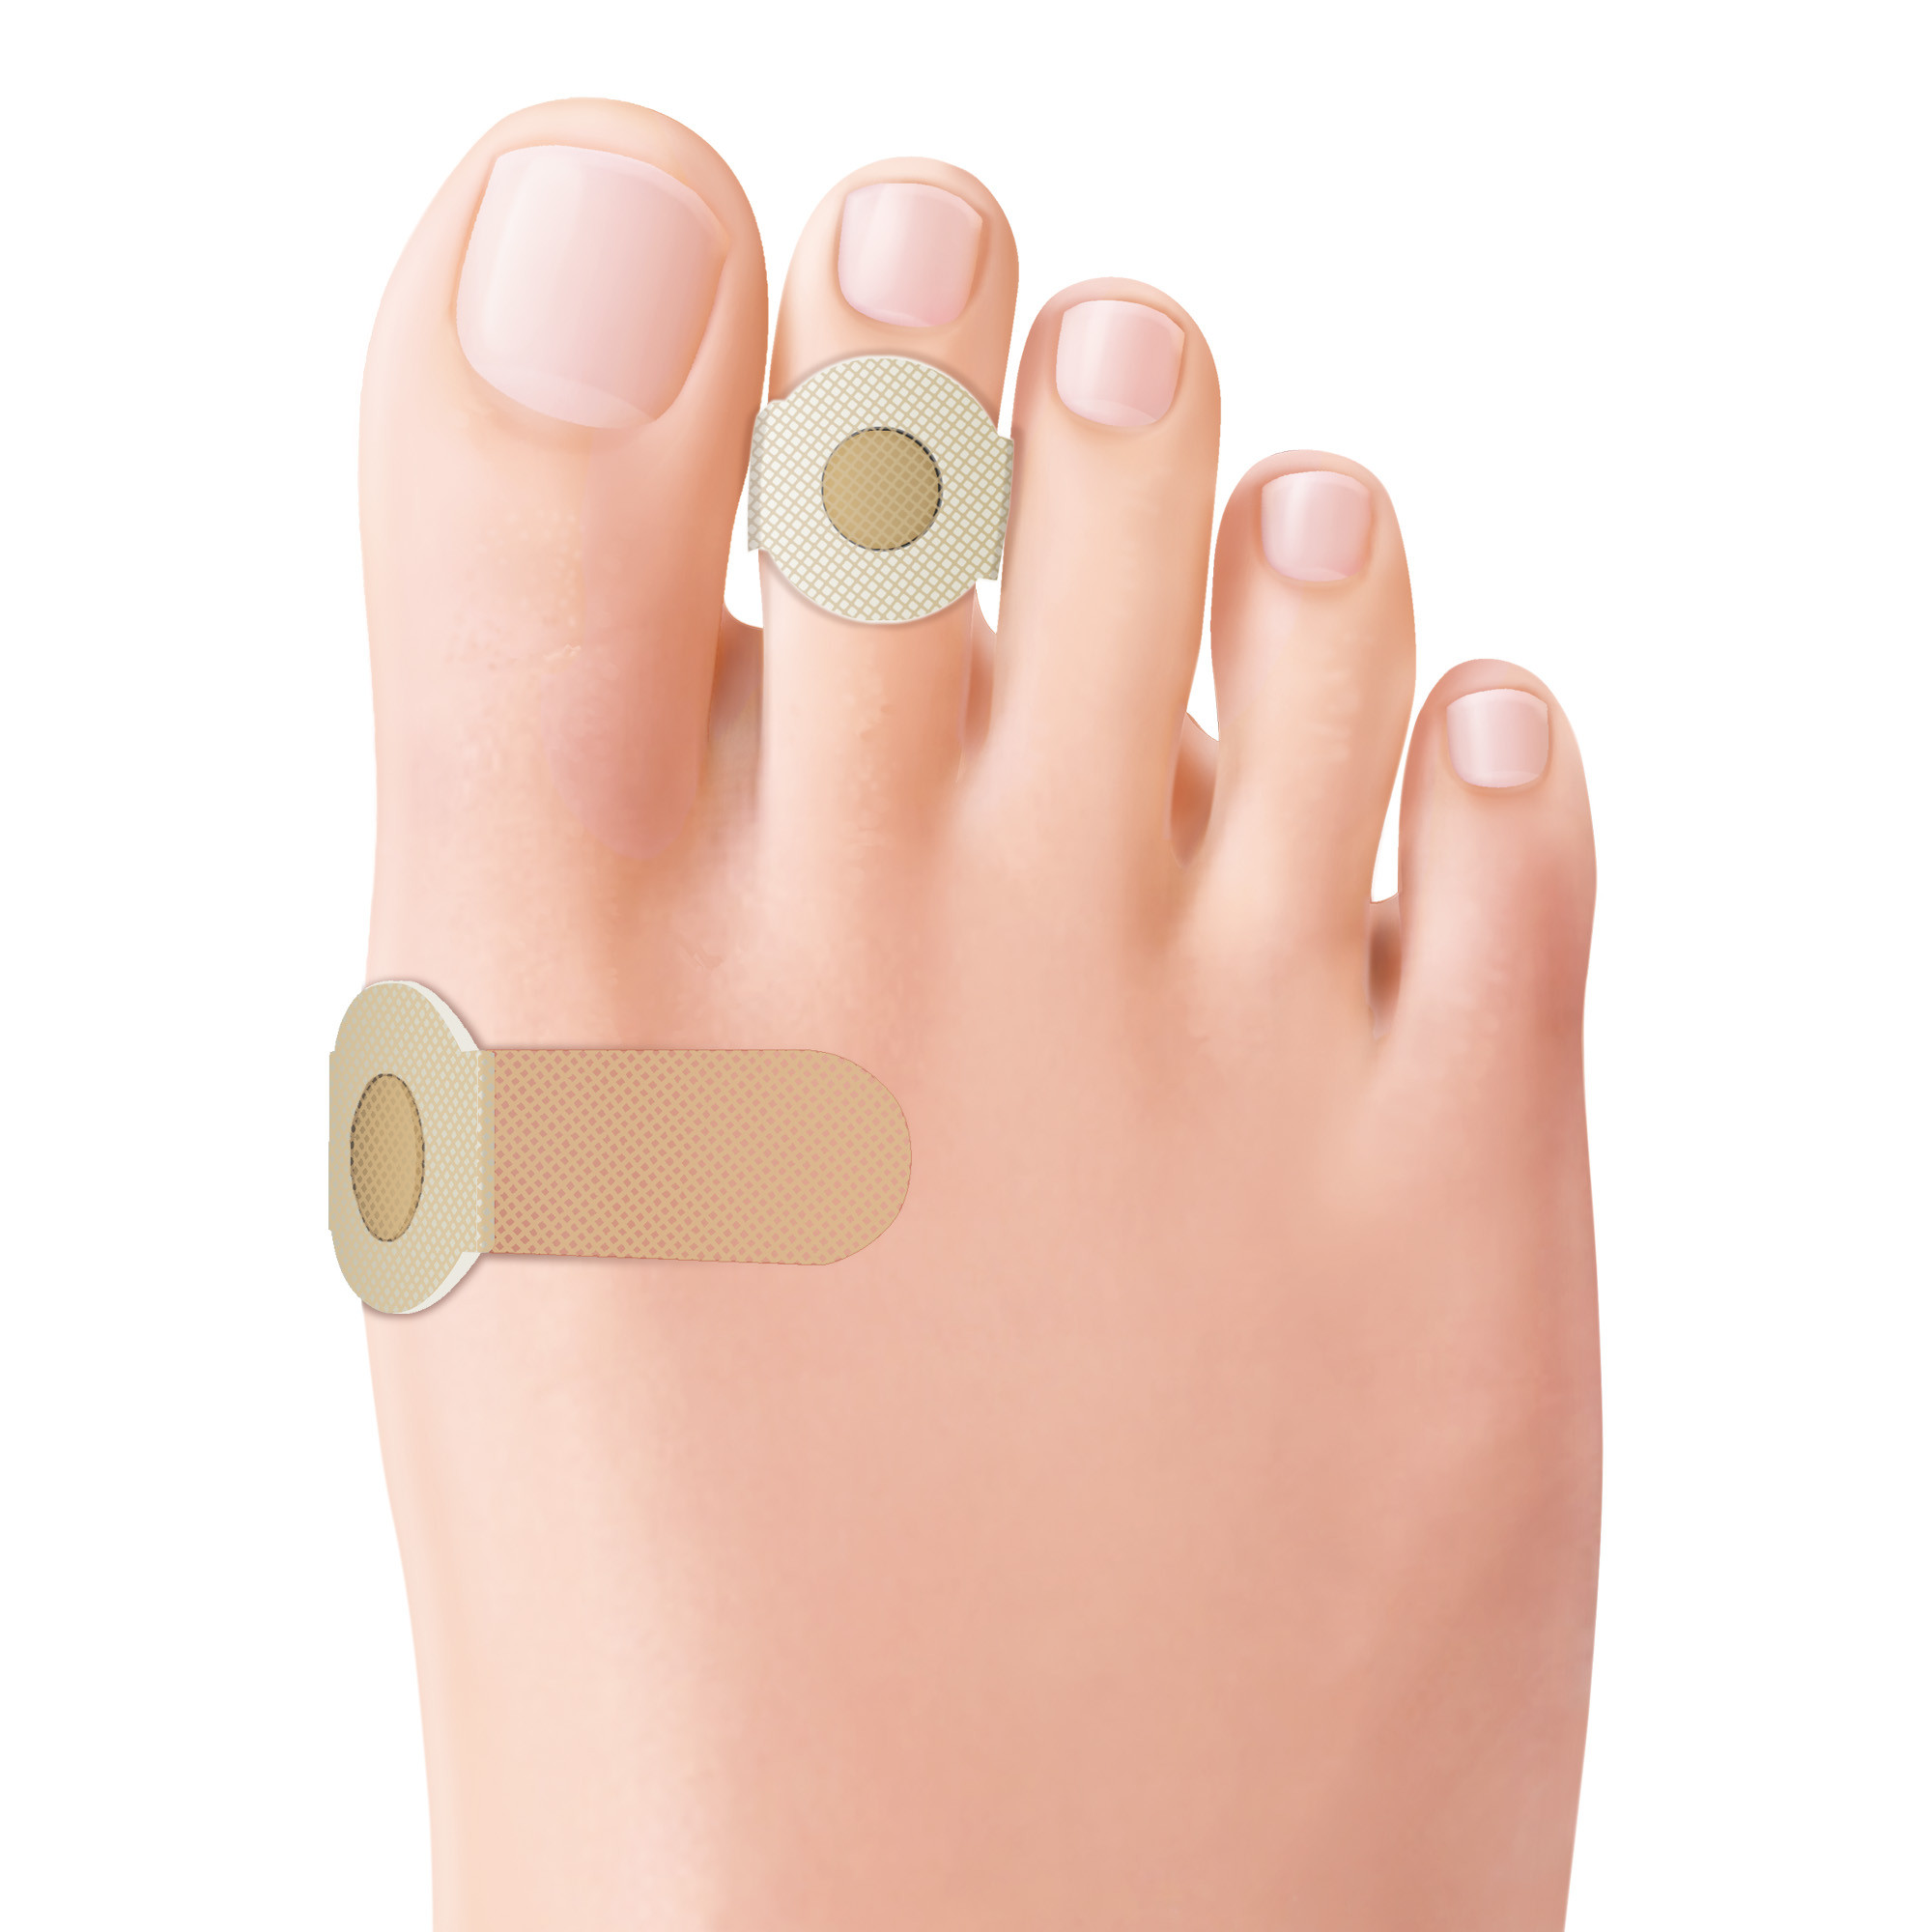 Foot plasters with corn protector and 40% Salicylic Acid 6 pcs